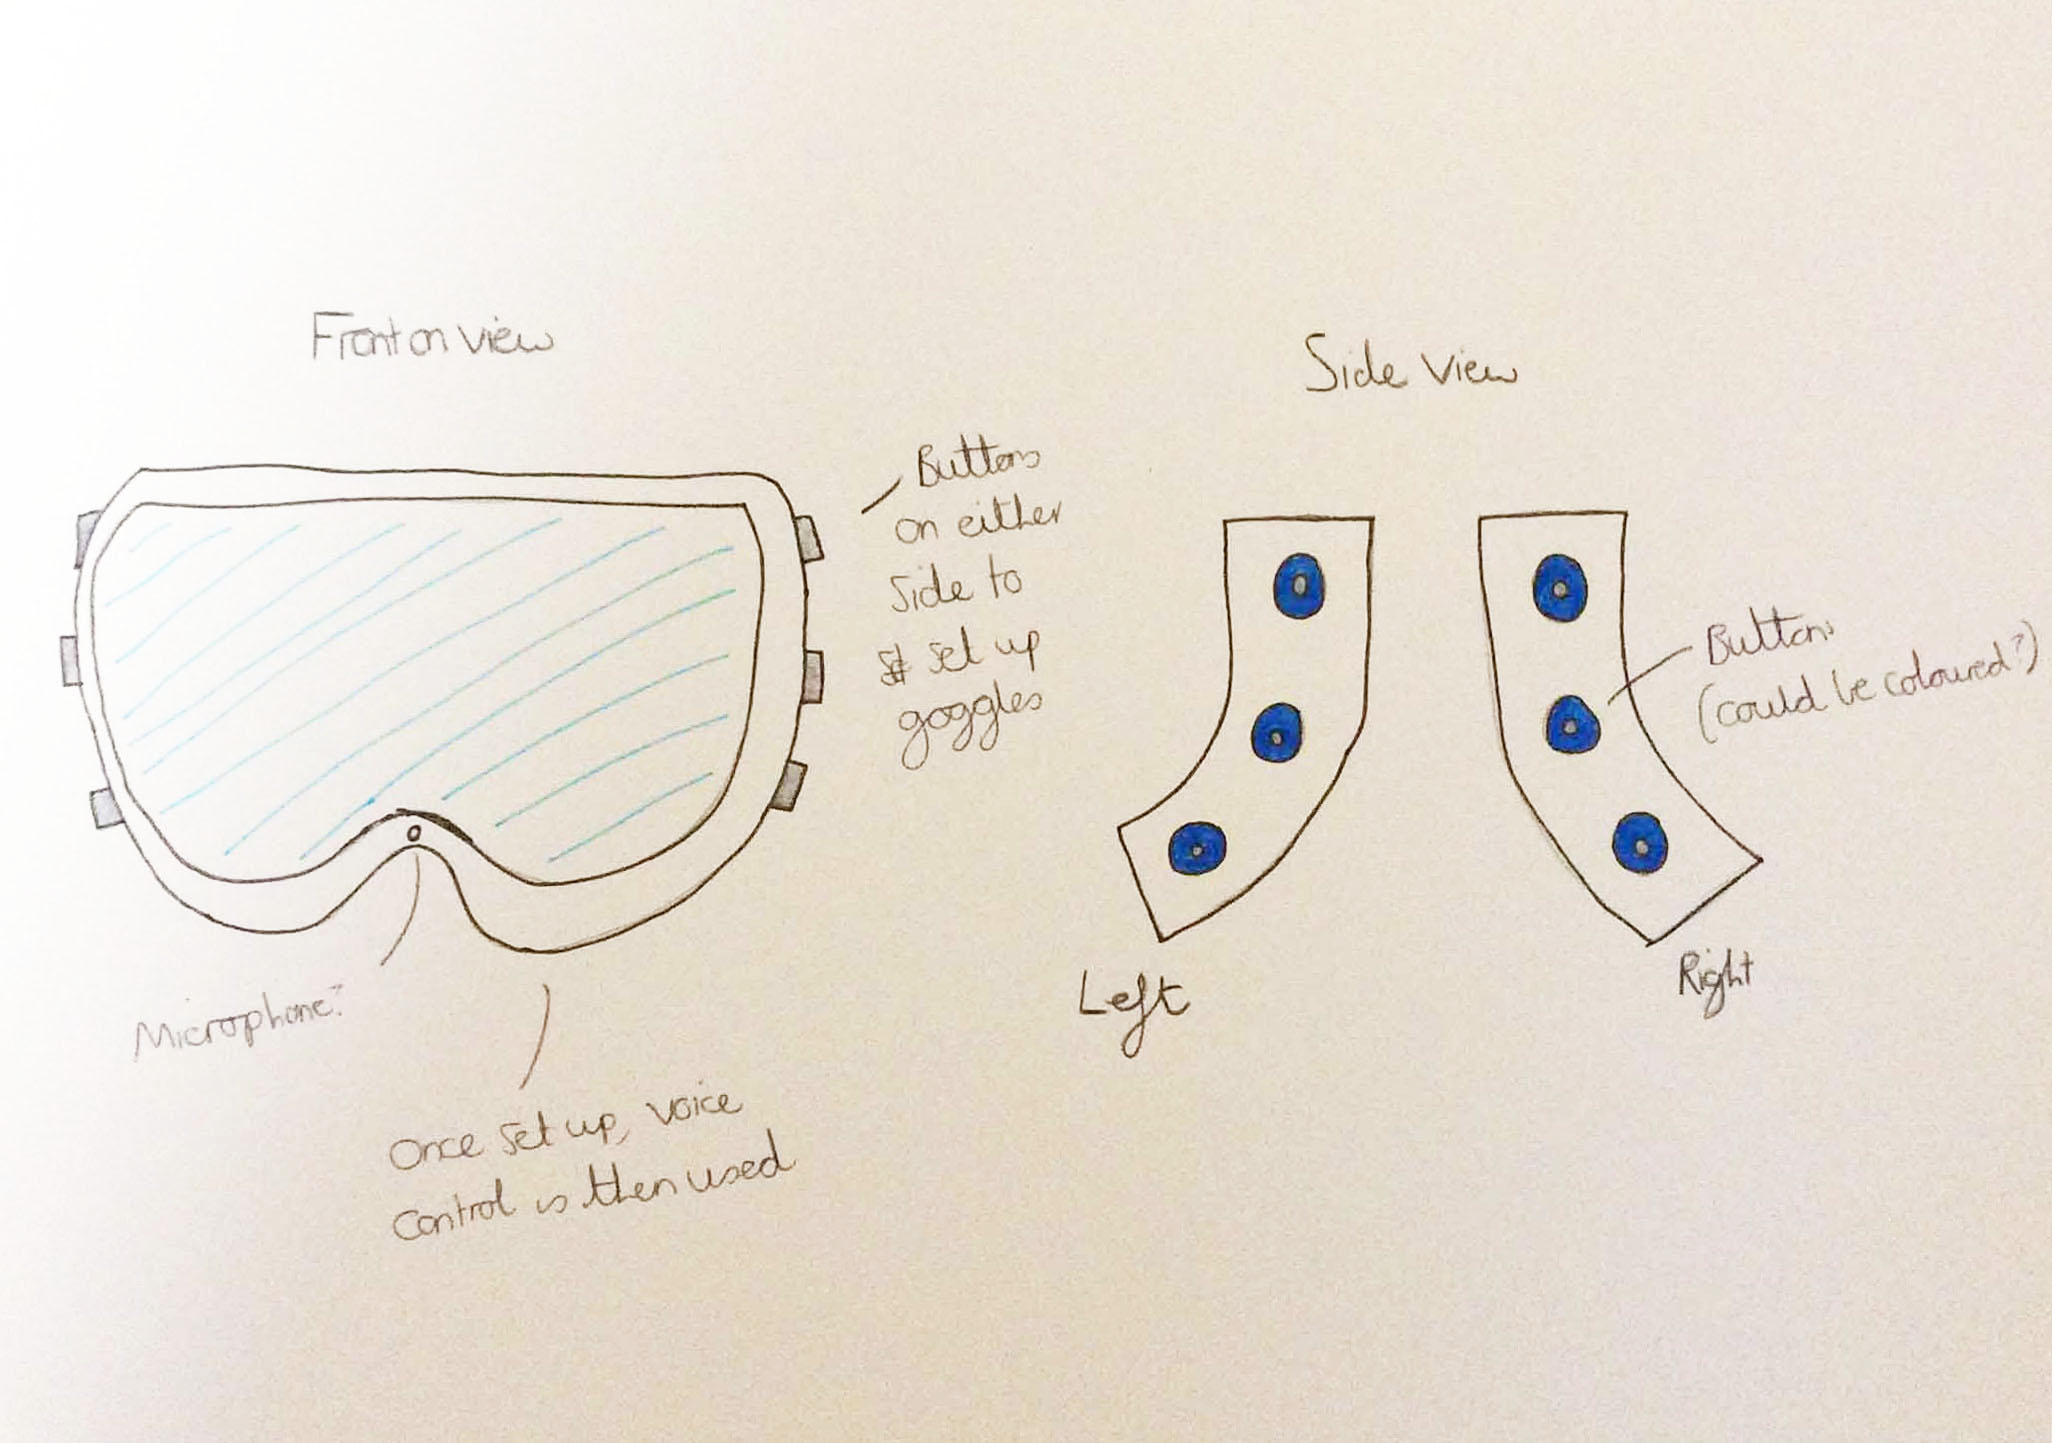 The Idea Relating to the Buttons being Situated on the Side of the Goggles